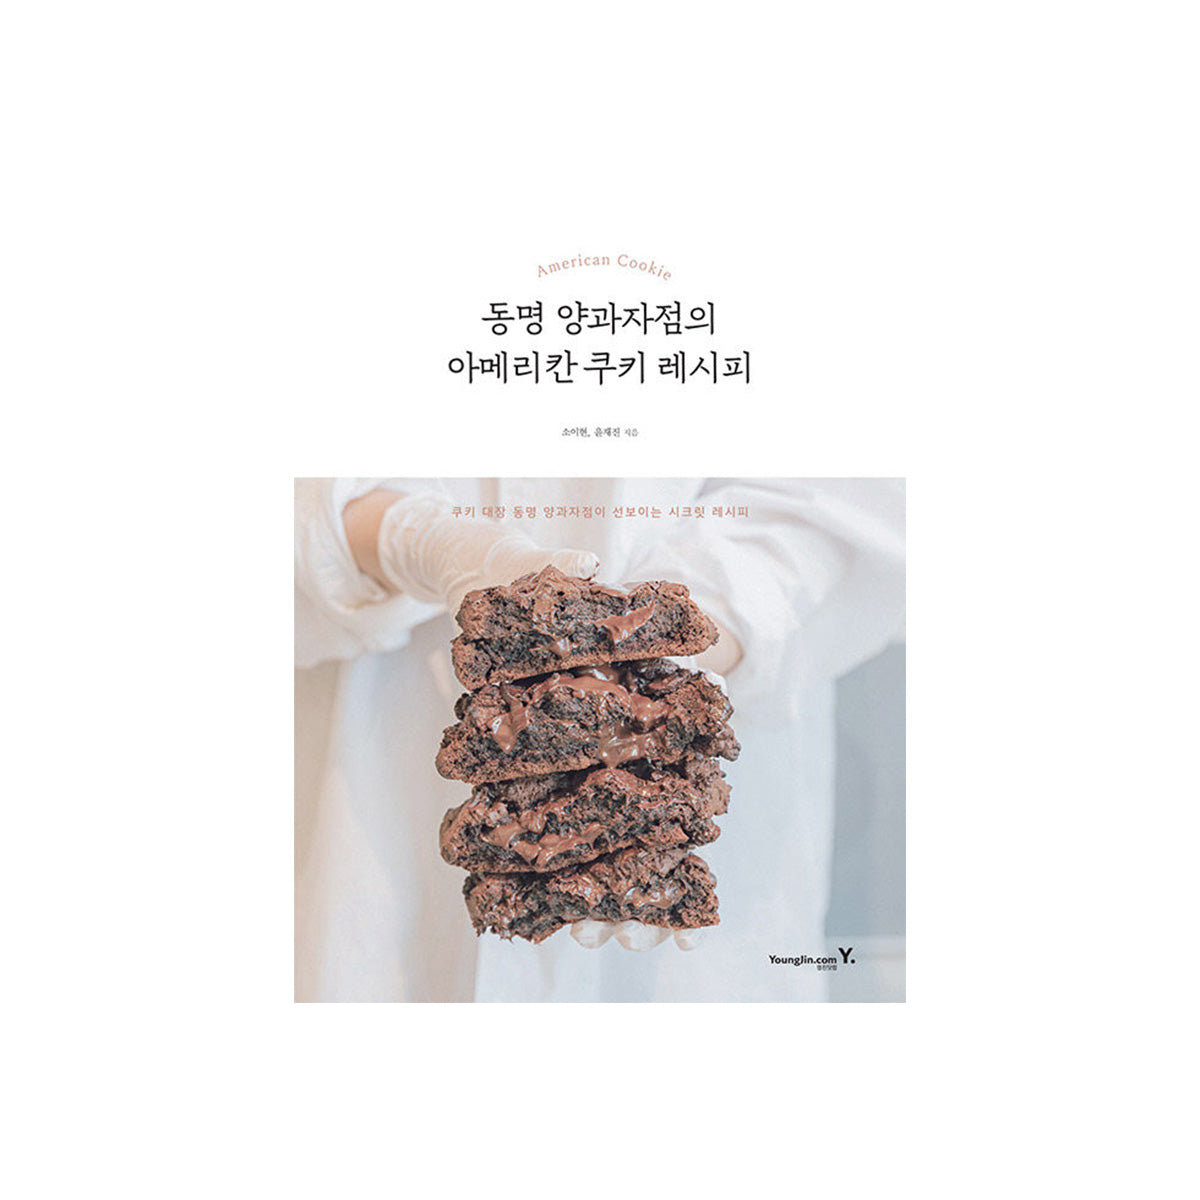 American Cookie Recipe by Dongmyung Bakery